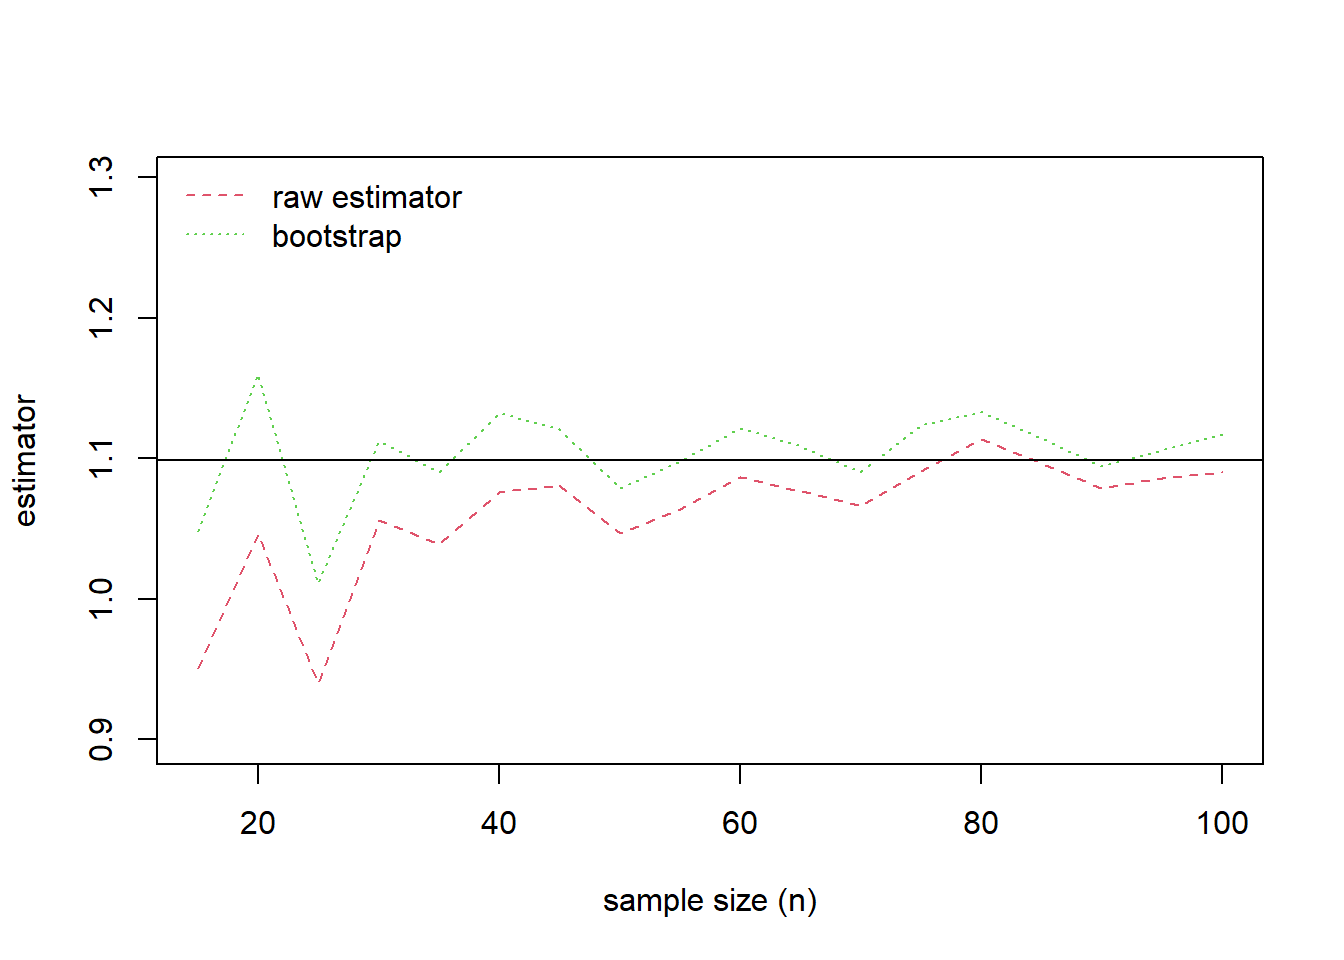 Comparison of Estimates. True value of the parameter is given by the solid horizontal line at \(\log(3) \approx 1.099\).